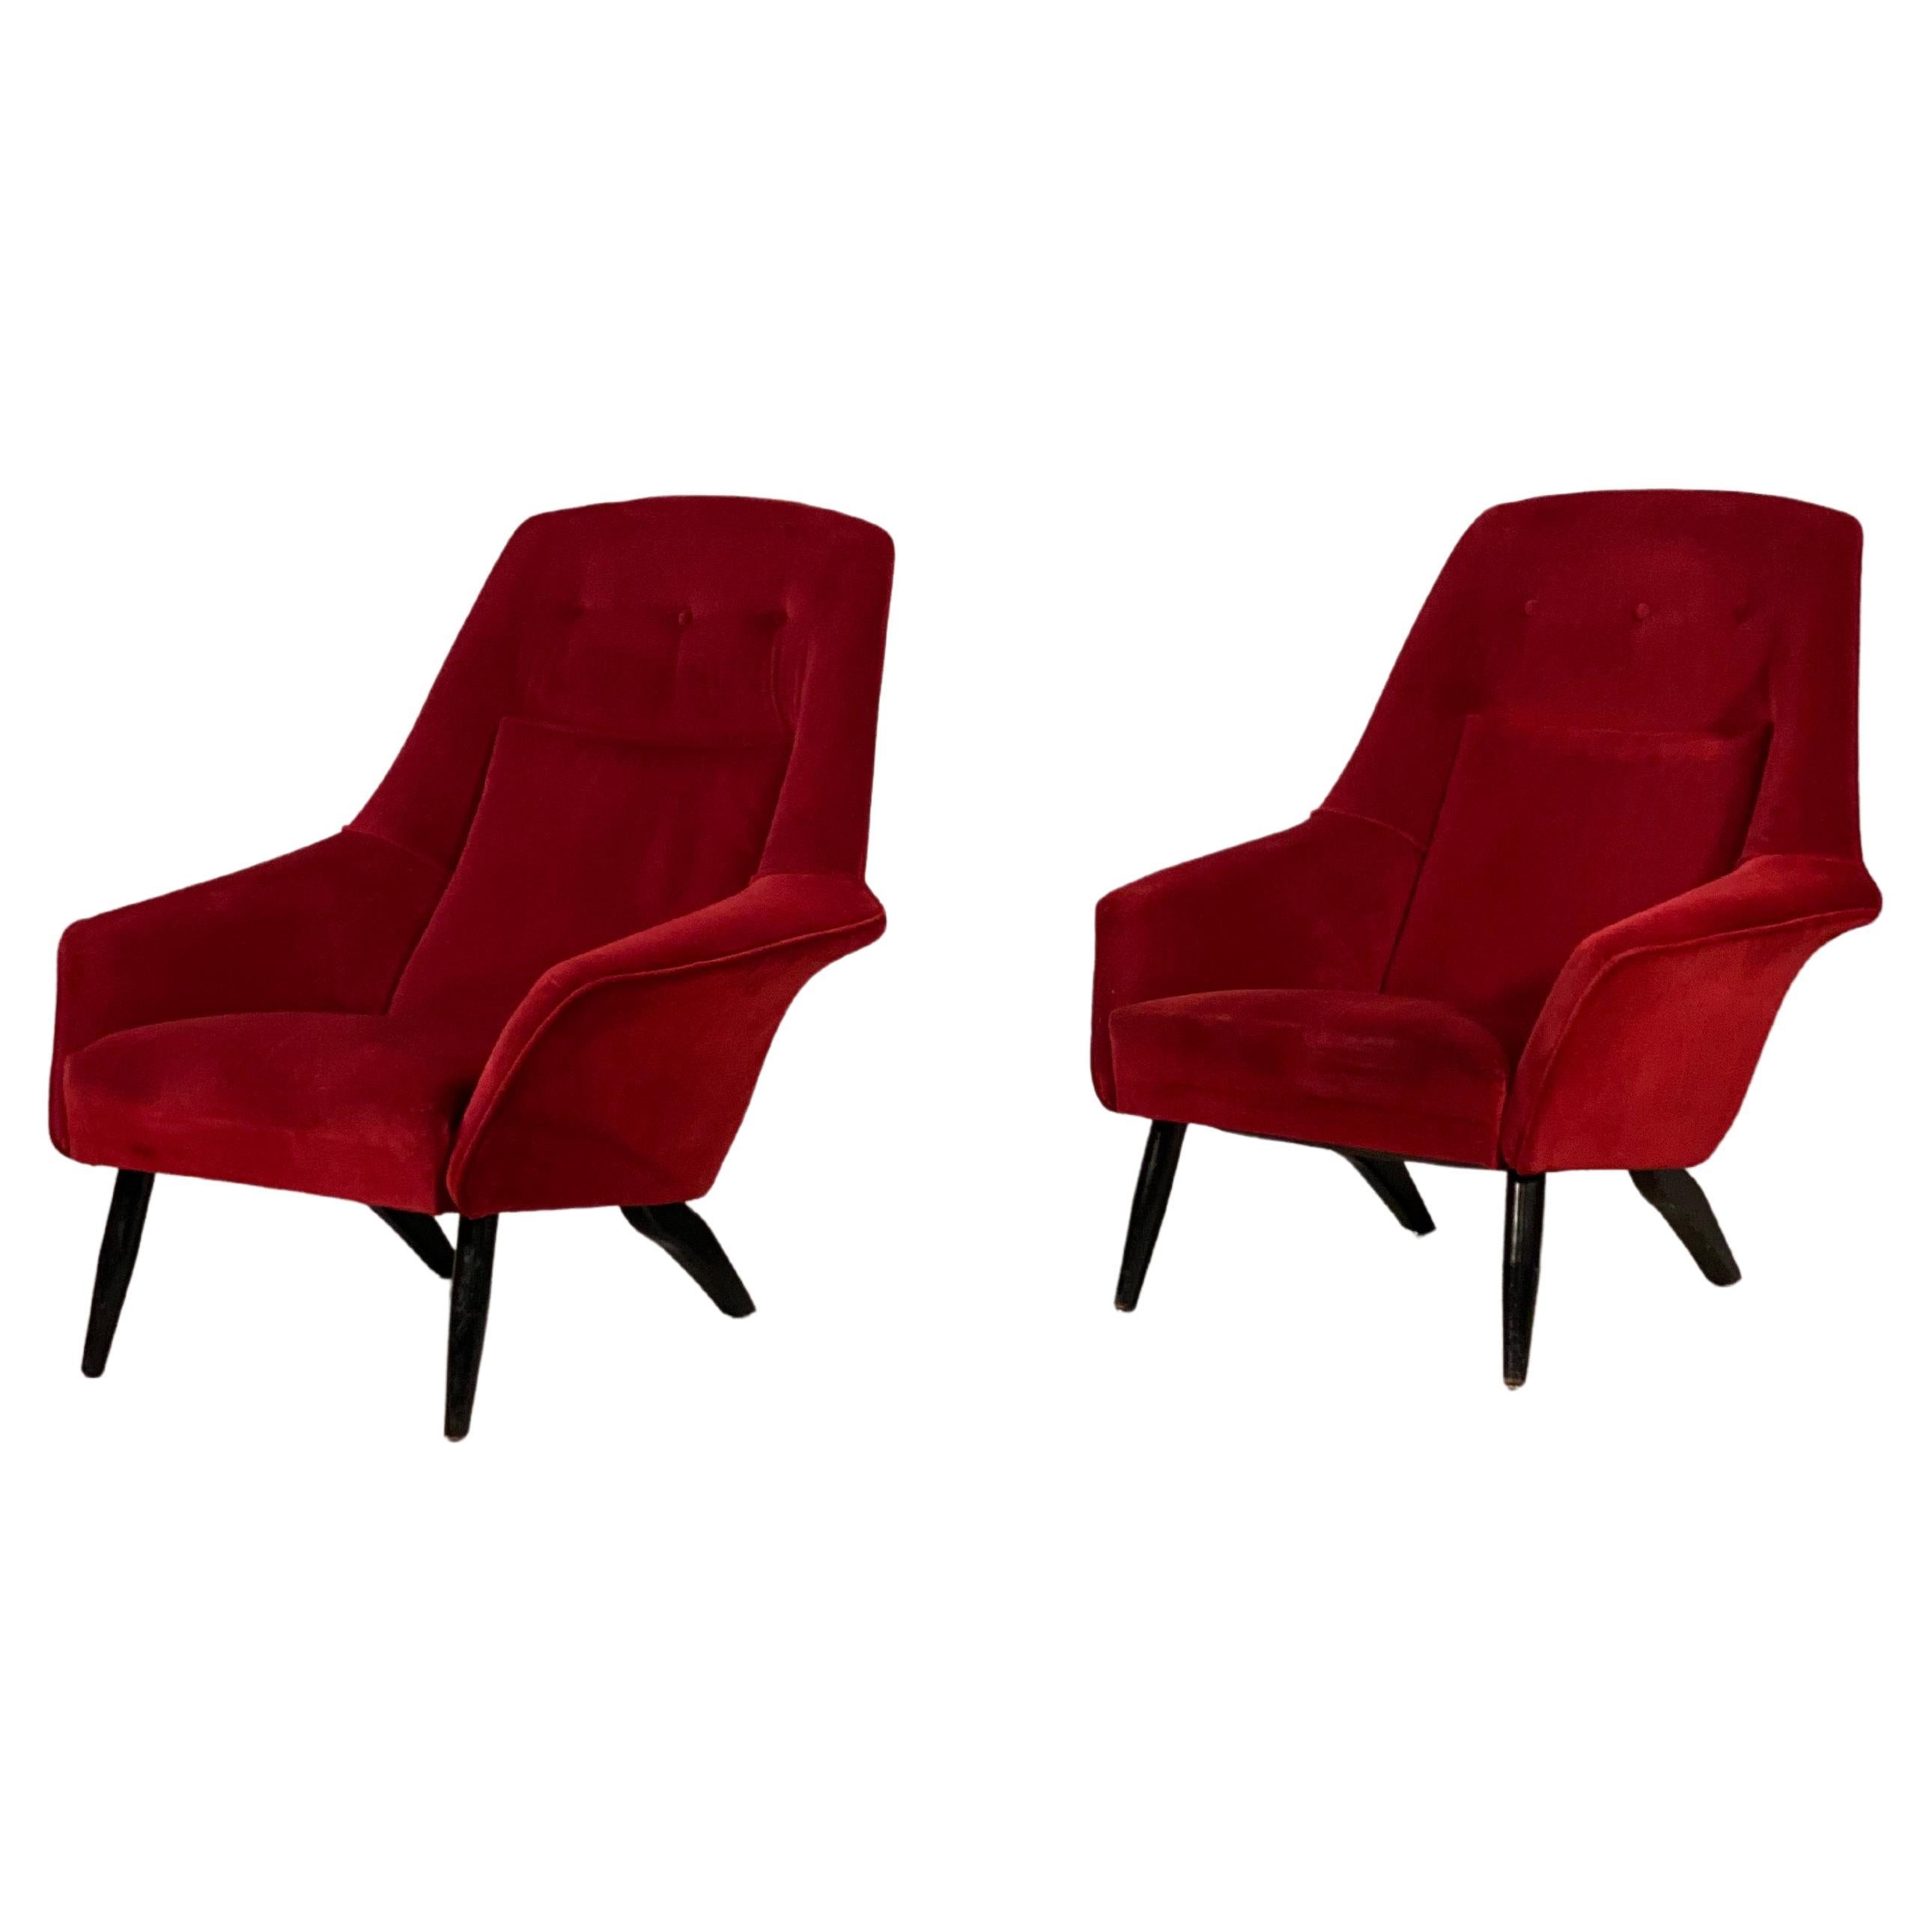 A Stylish Pair Of 1960’s Armchair’s For Sale